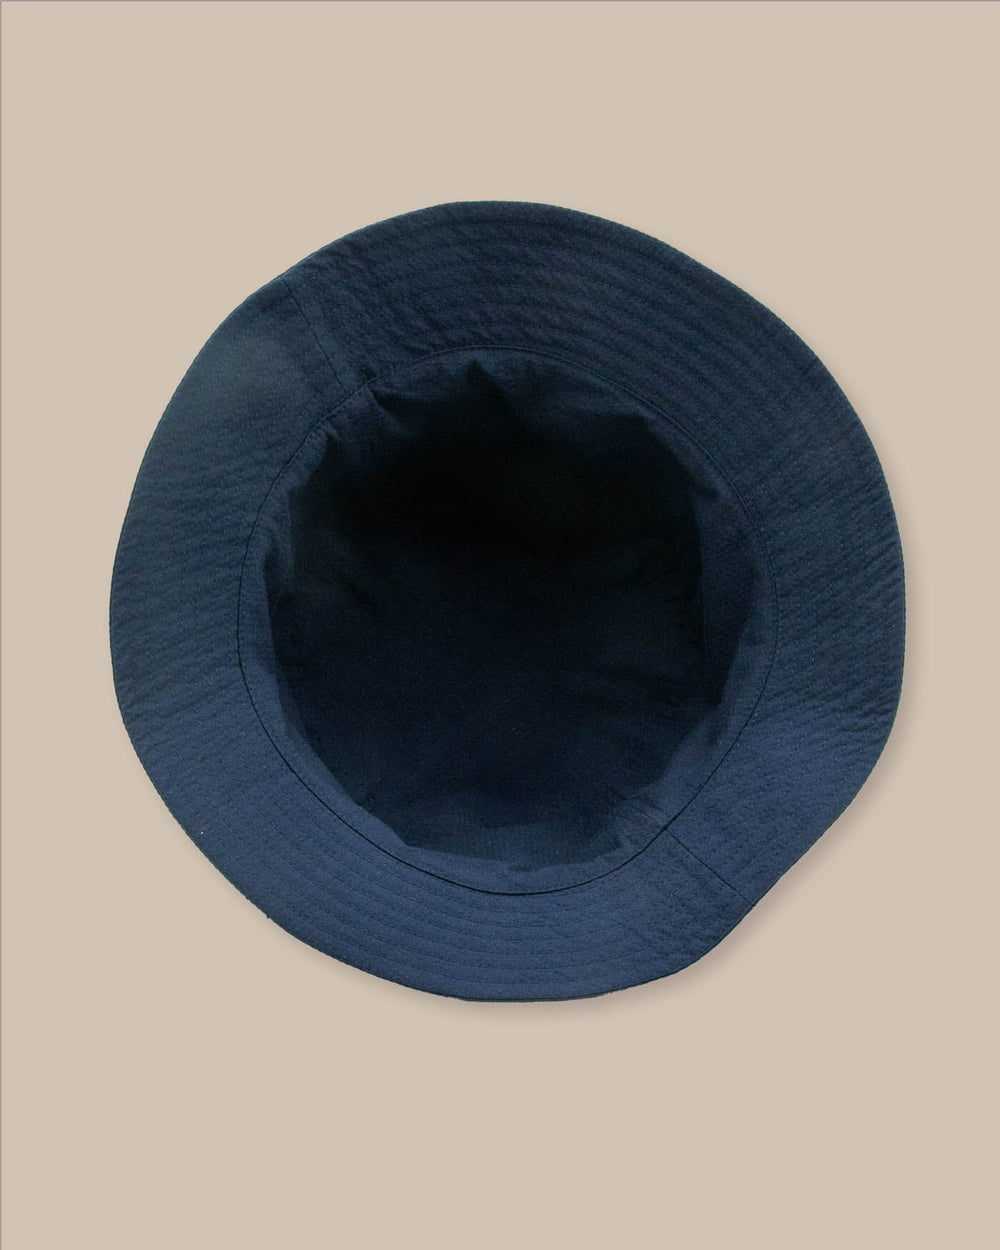 The detail view of the Southern Tide Sun Washed Seersucker Bucket Hat by Southern Tide - Navy 